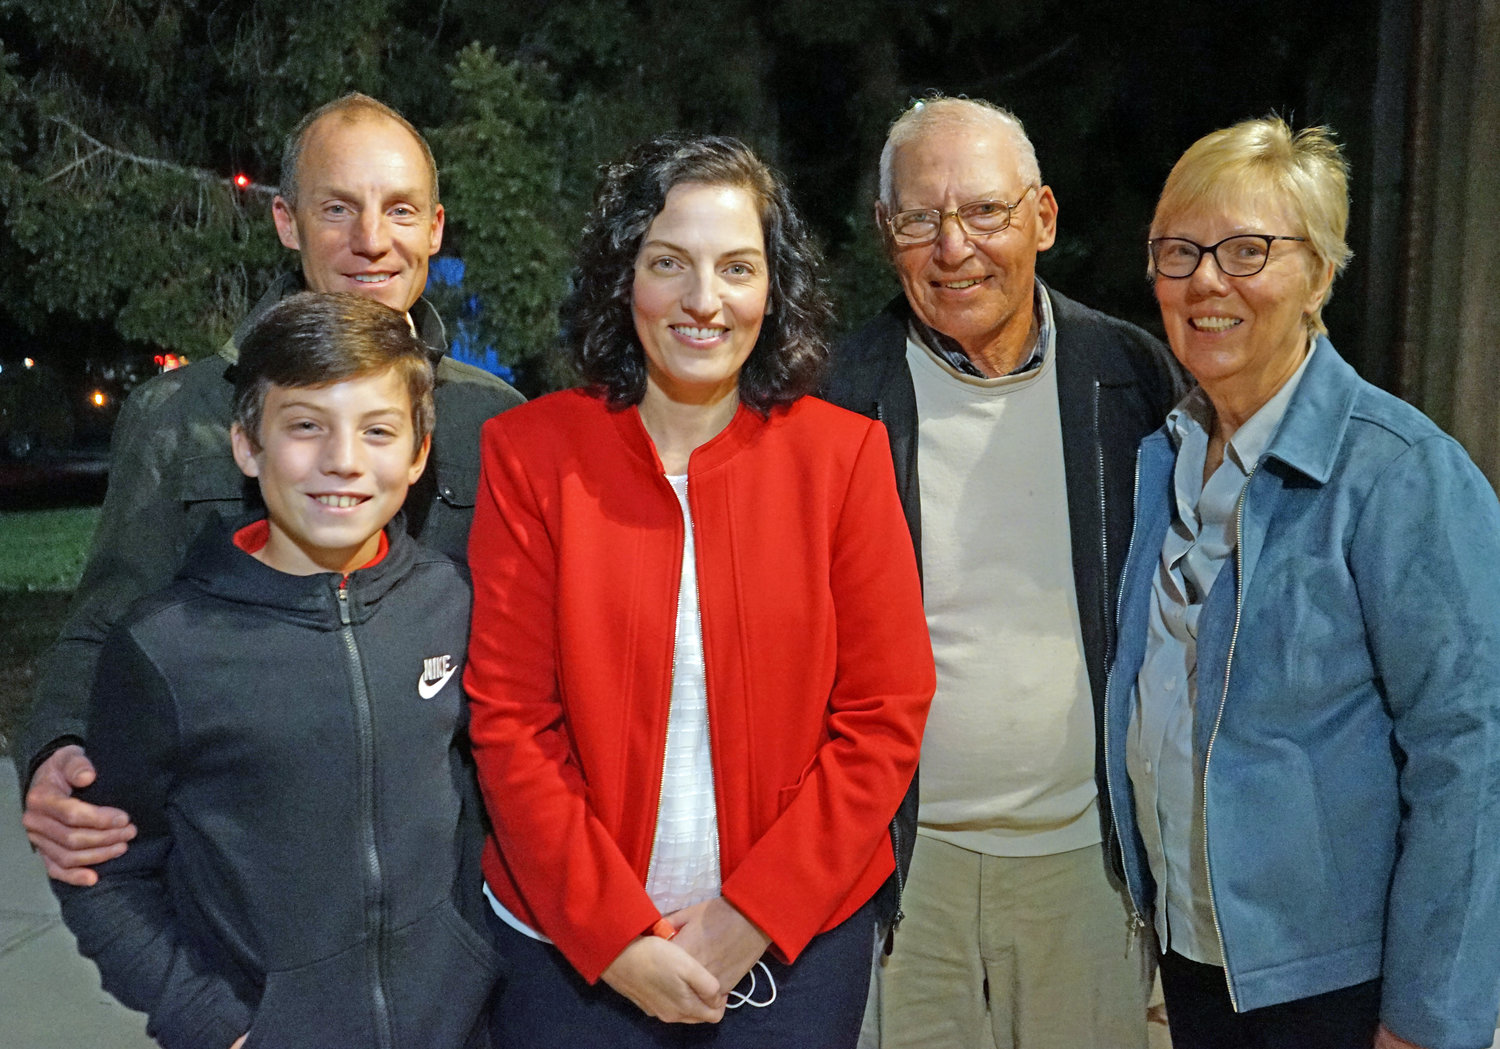 Dr. Judith A. LaRocca with her parents, husband and son following the announcement of her appointment as Valley Stream Union Free District Thirteen’s next Superintendent of Schools.